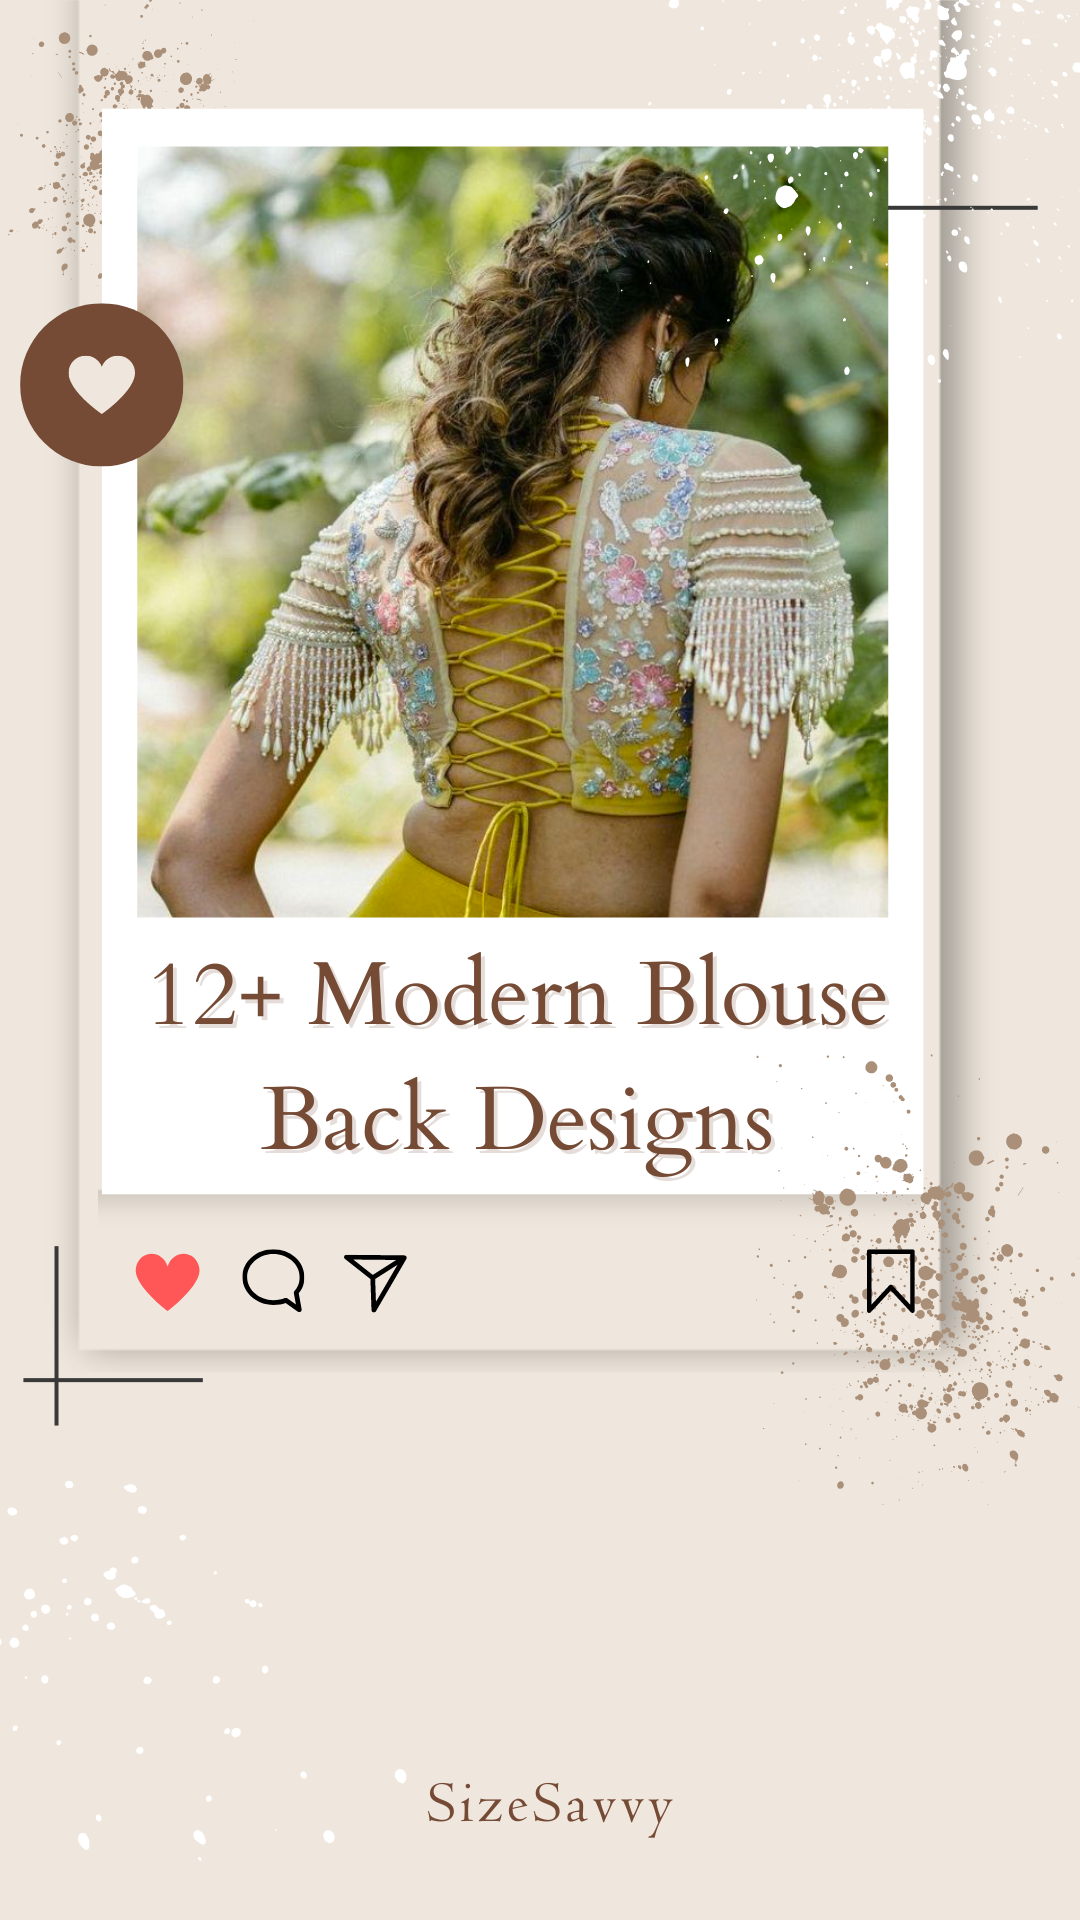 Top 12+ Modern Blouse Back Designs to Elevate Your Blouse Style